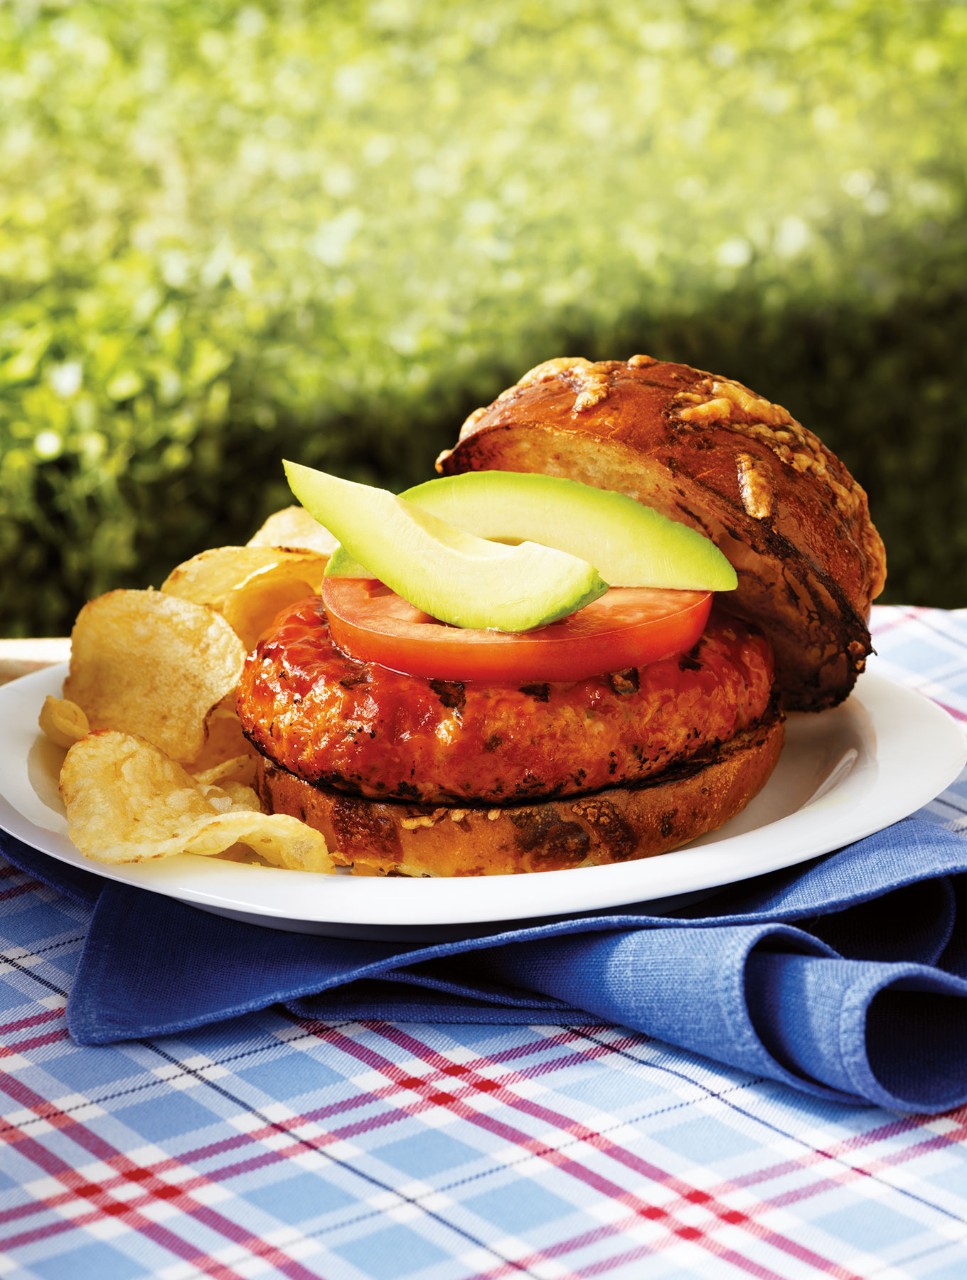 Chicken Burger with Chipotle Barbecue Sauce